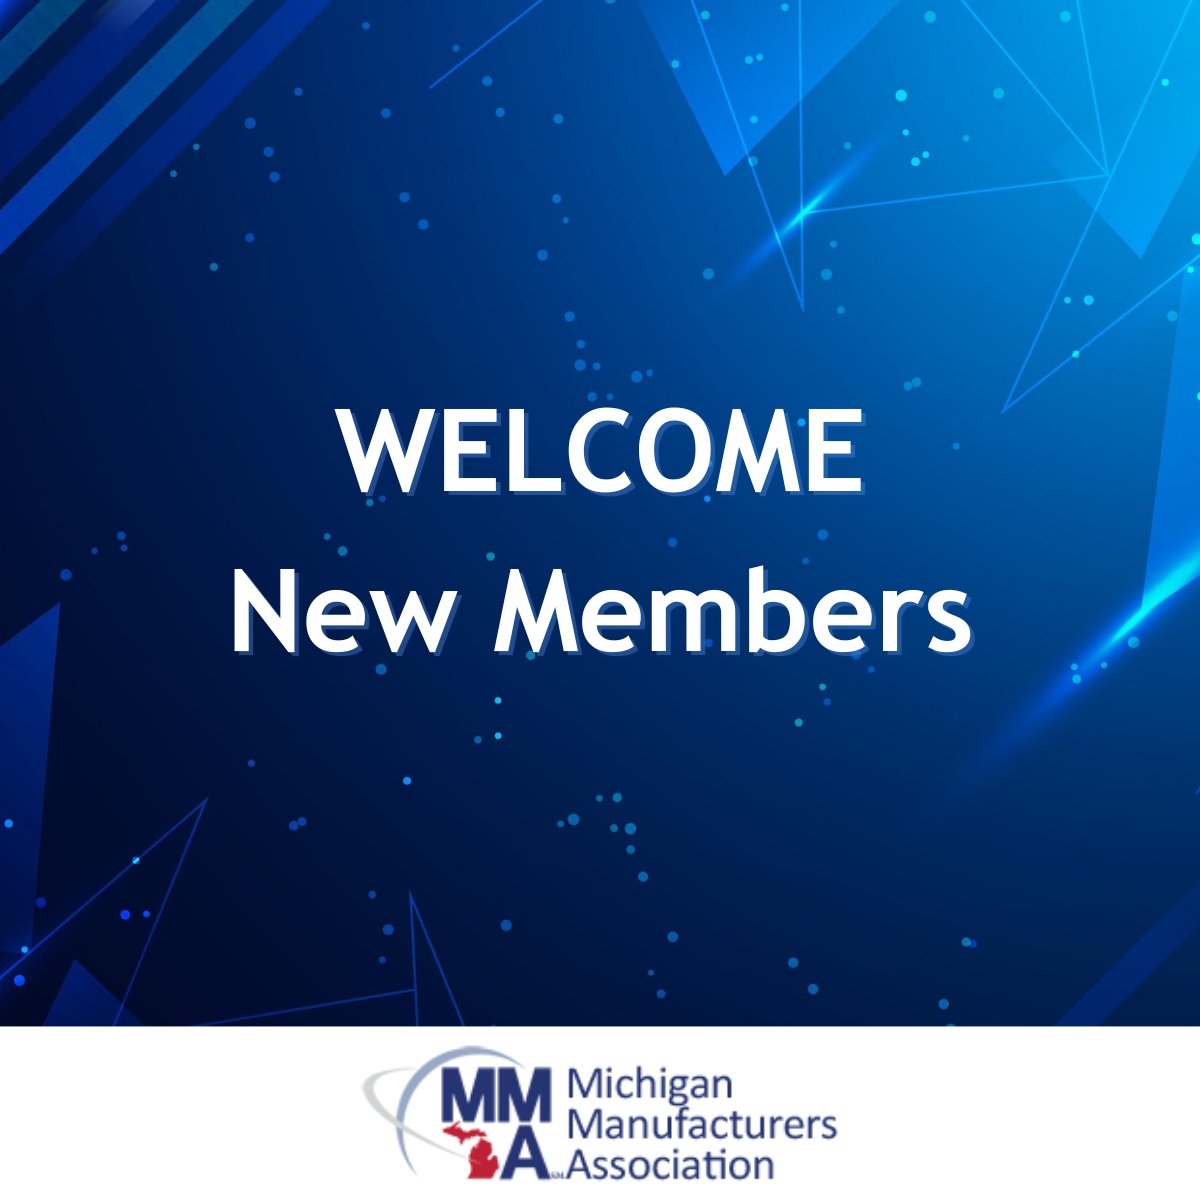 Let's give a warm welcome to our newest members: Ariox Clark Construction Company Climate Technologies Corp. Explore a world of MMA membership options and exciting opportunities at bit.ly/3MVbkwx to elevate your industry engagement and growth today. #MiManufacturers